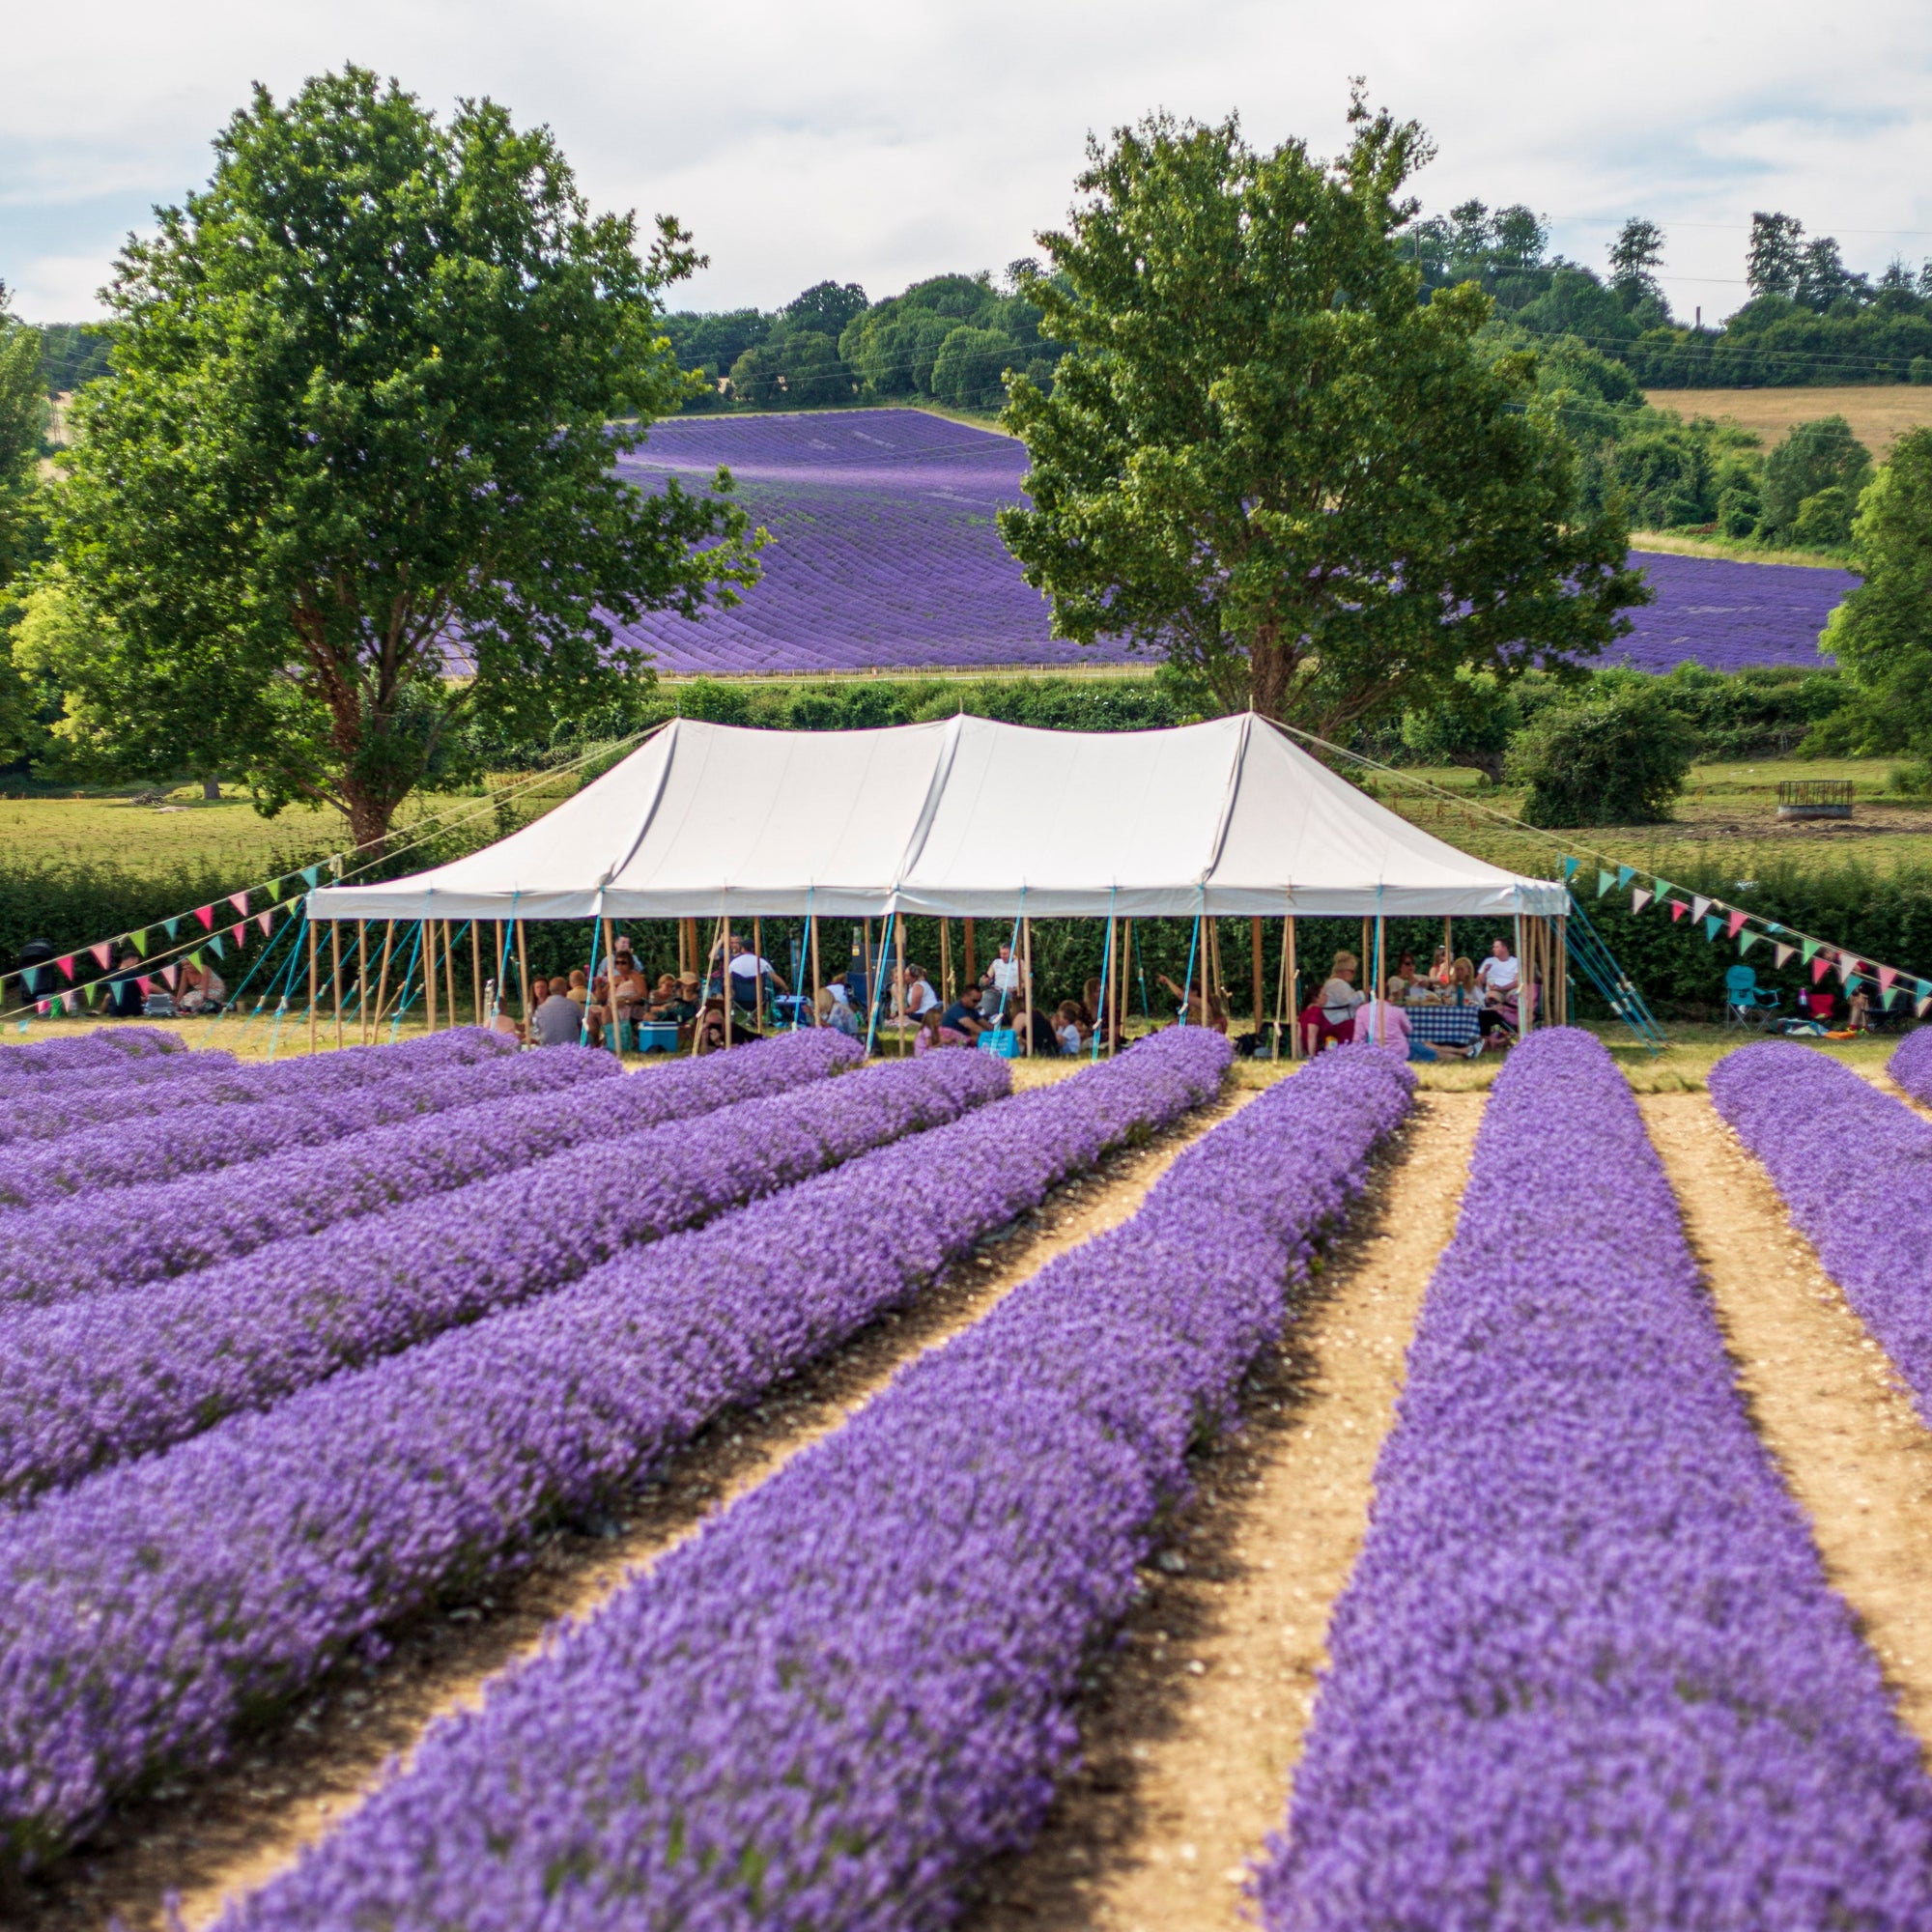 LAVENDER GIN PICNIC EXPERIENCE TICKETS FOR 2 ADULTS